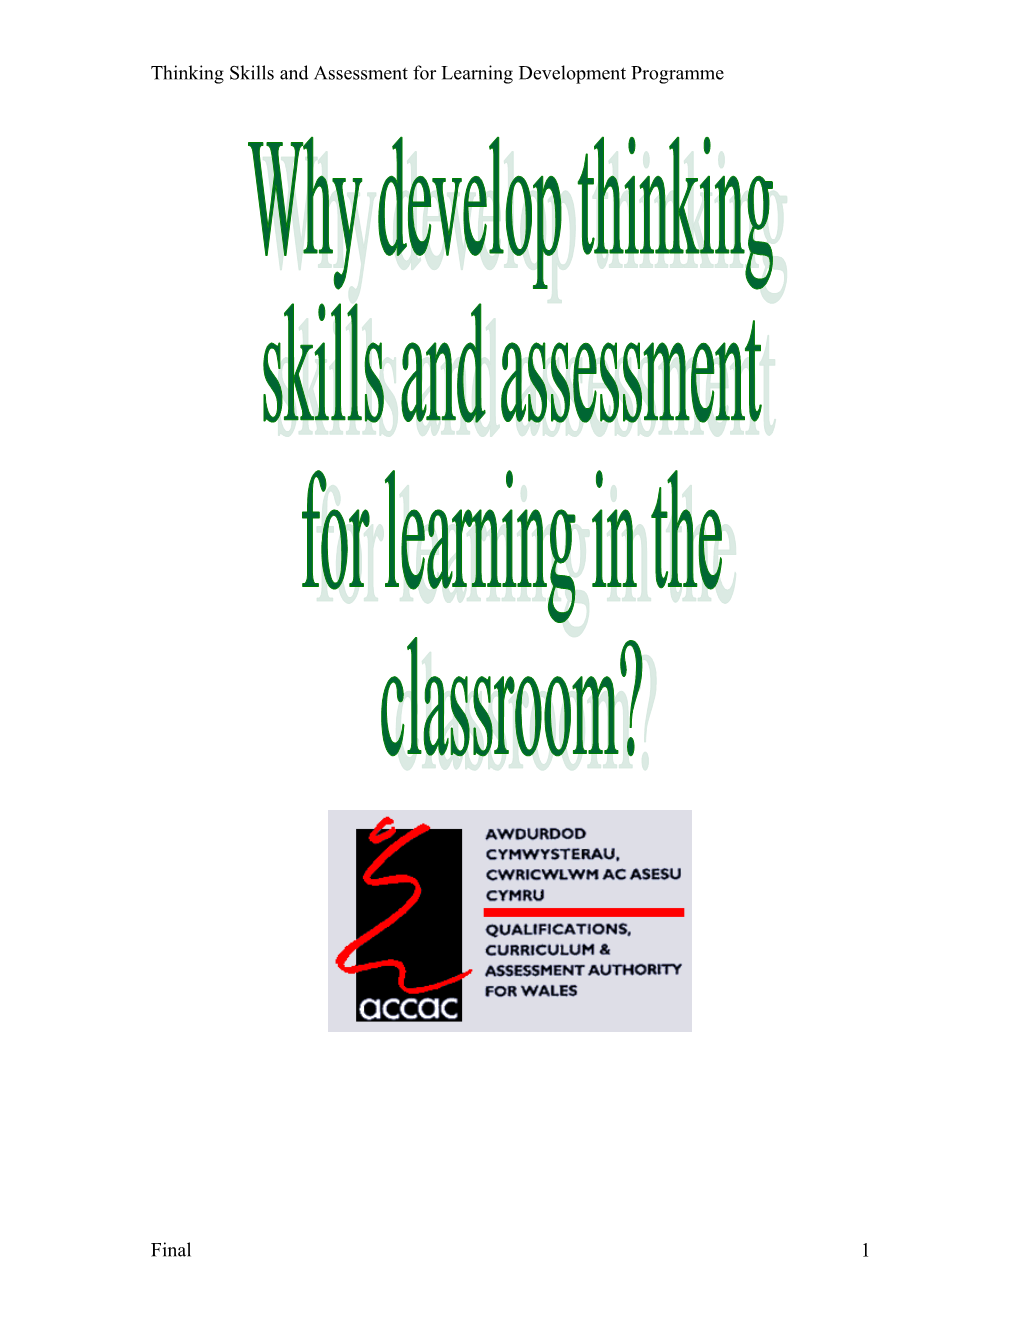 Thinking Skills and Assessment for Learning